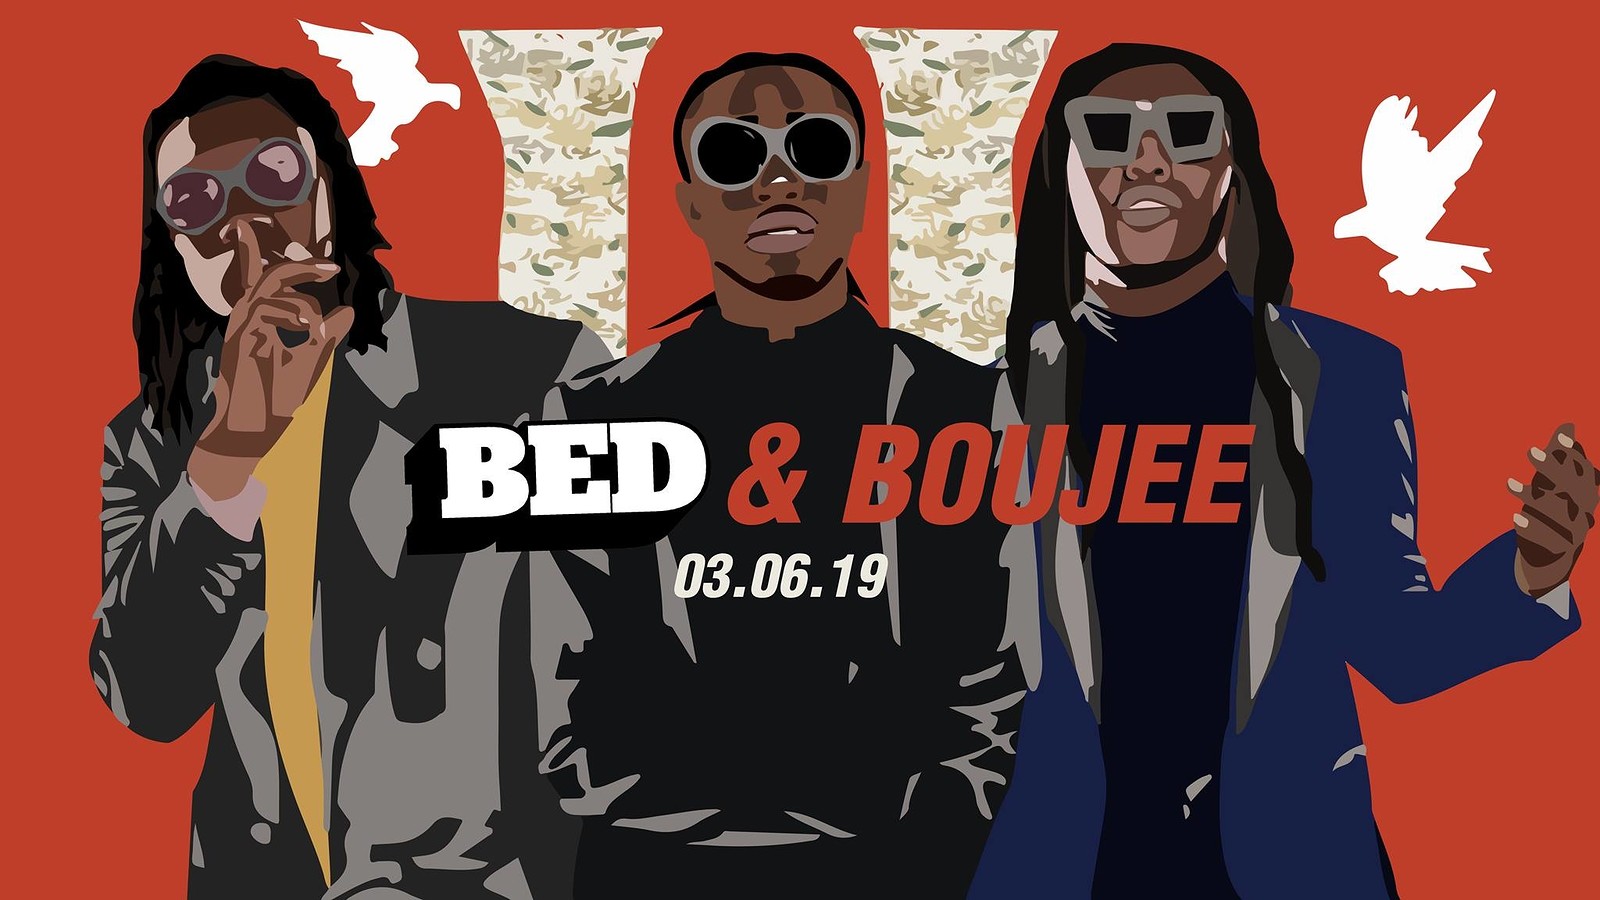 TONIGHT: BED Bristol: BED & Boujee at Gravity Nightclubs